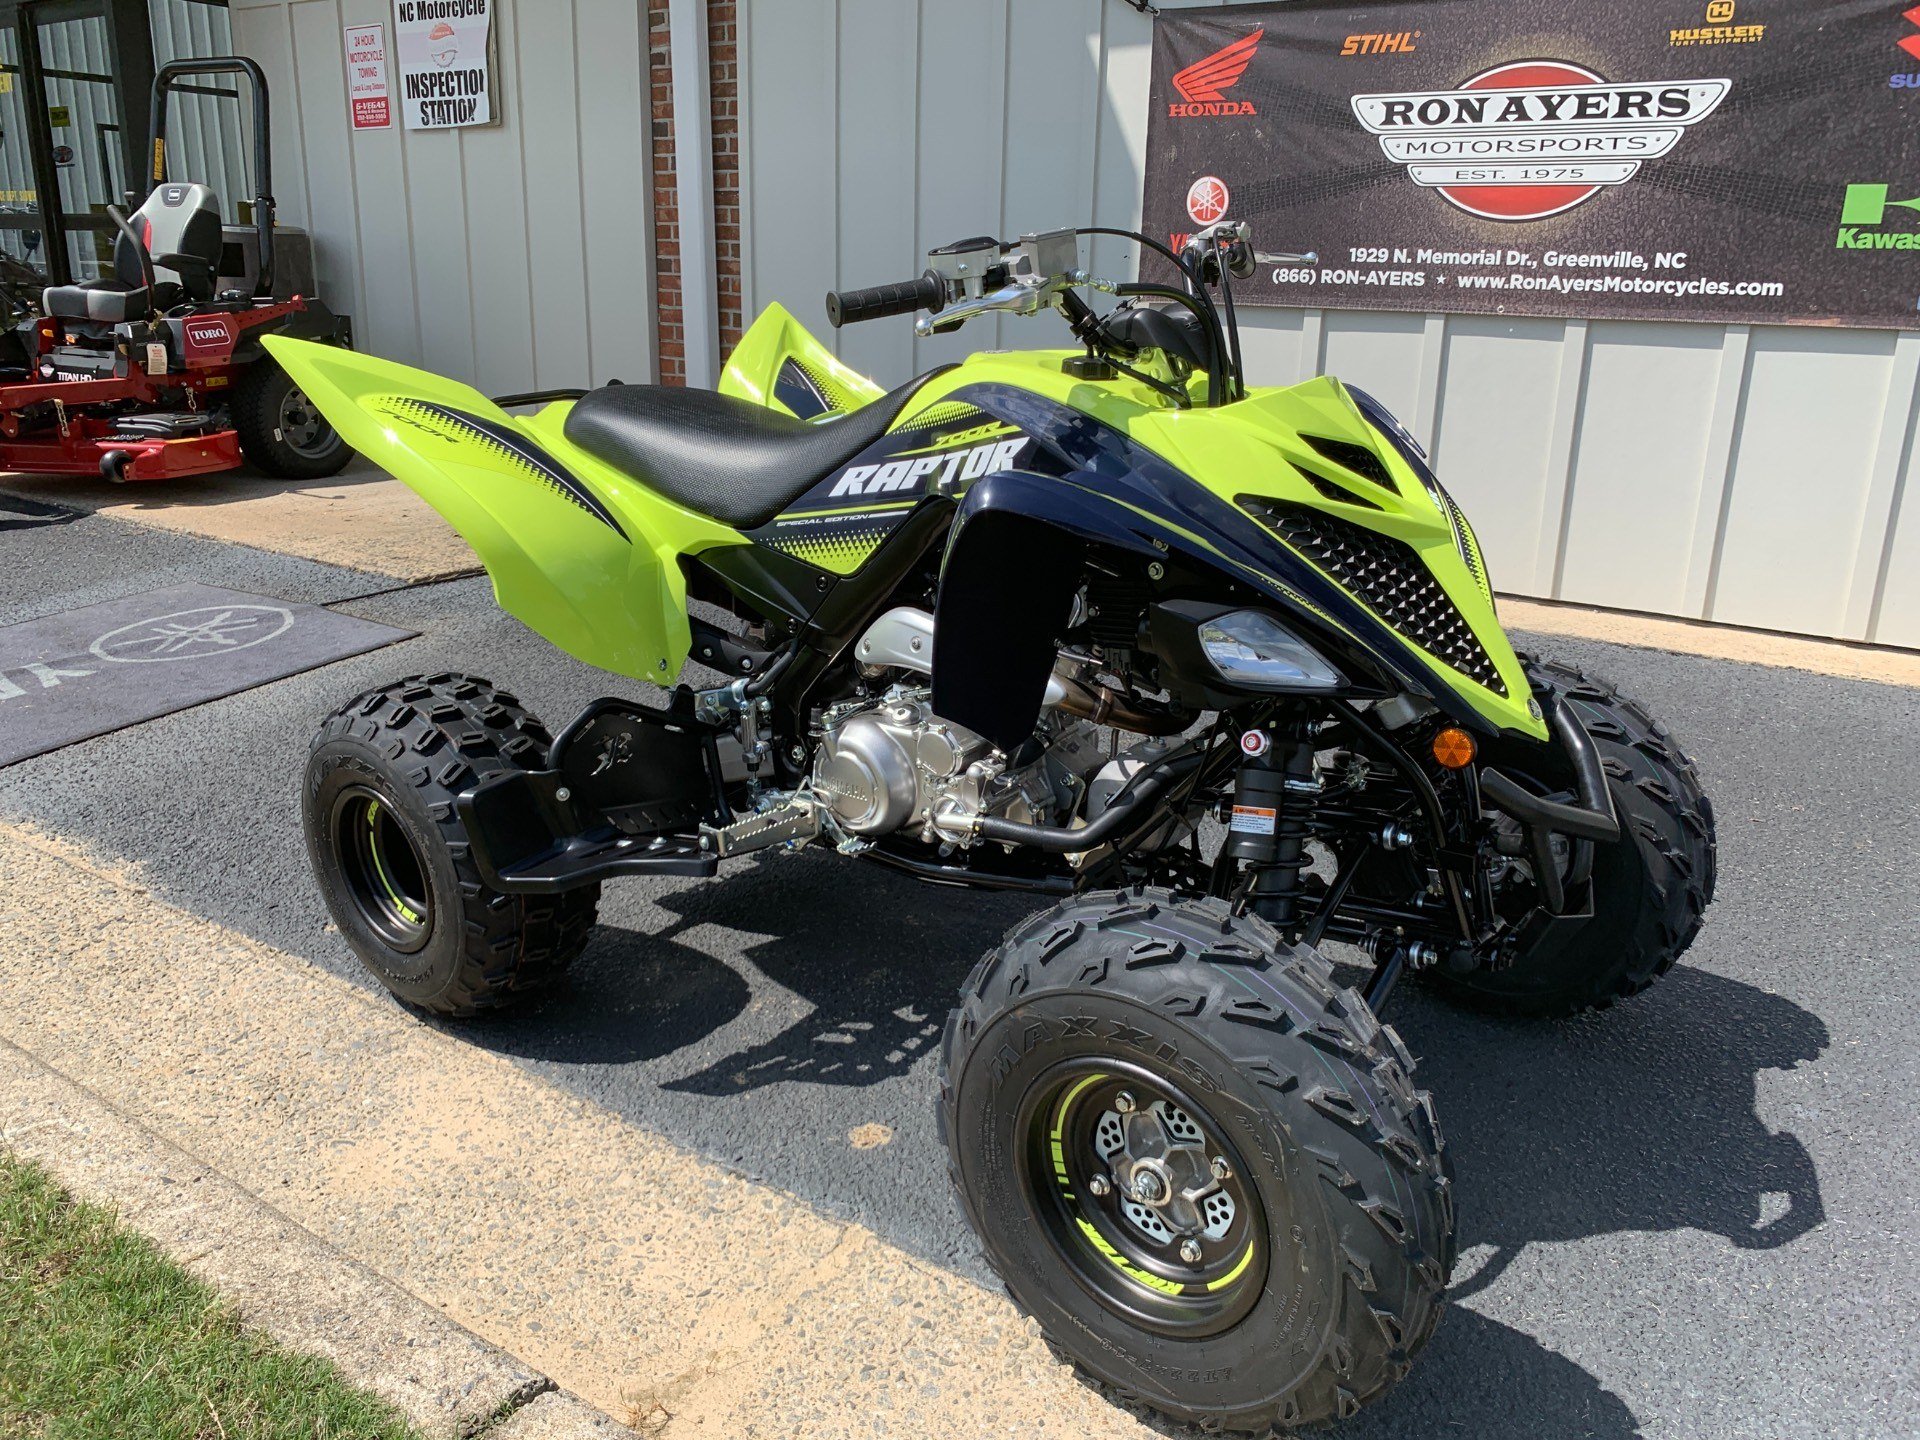 New 2020 Yamaha Raptor 700R SE ATVs in Greenville, NC Stock Number N/A